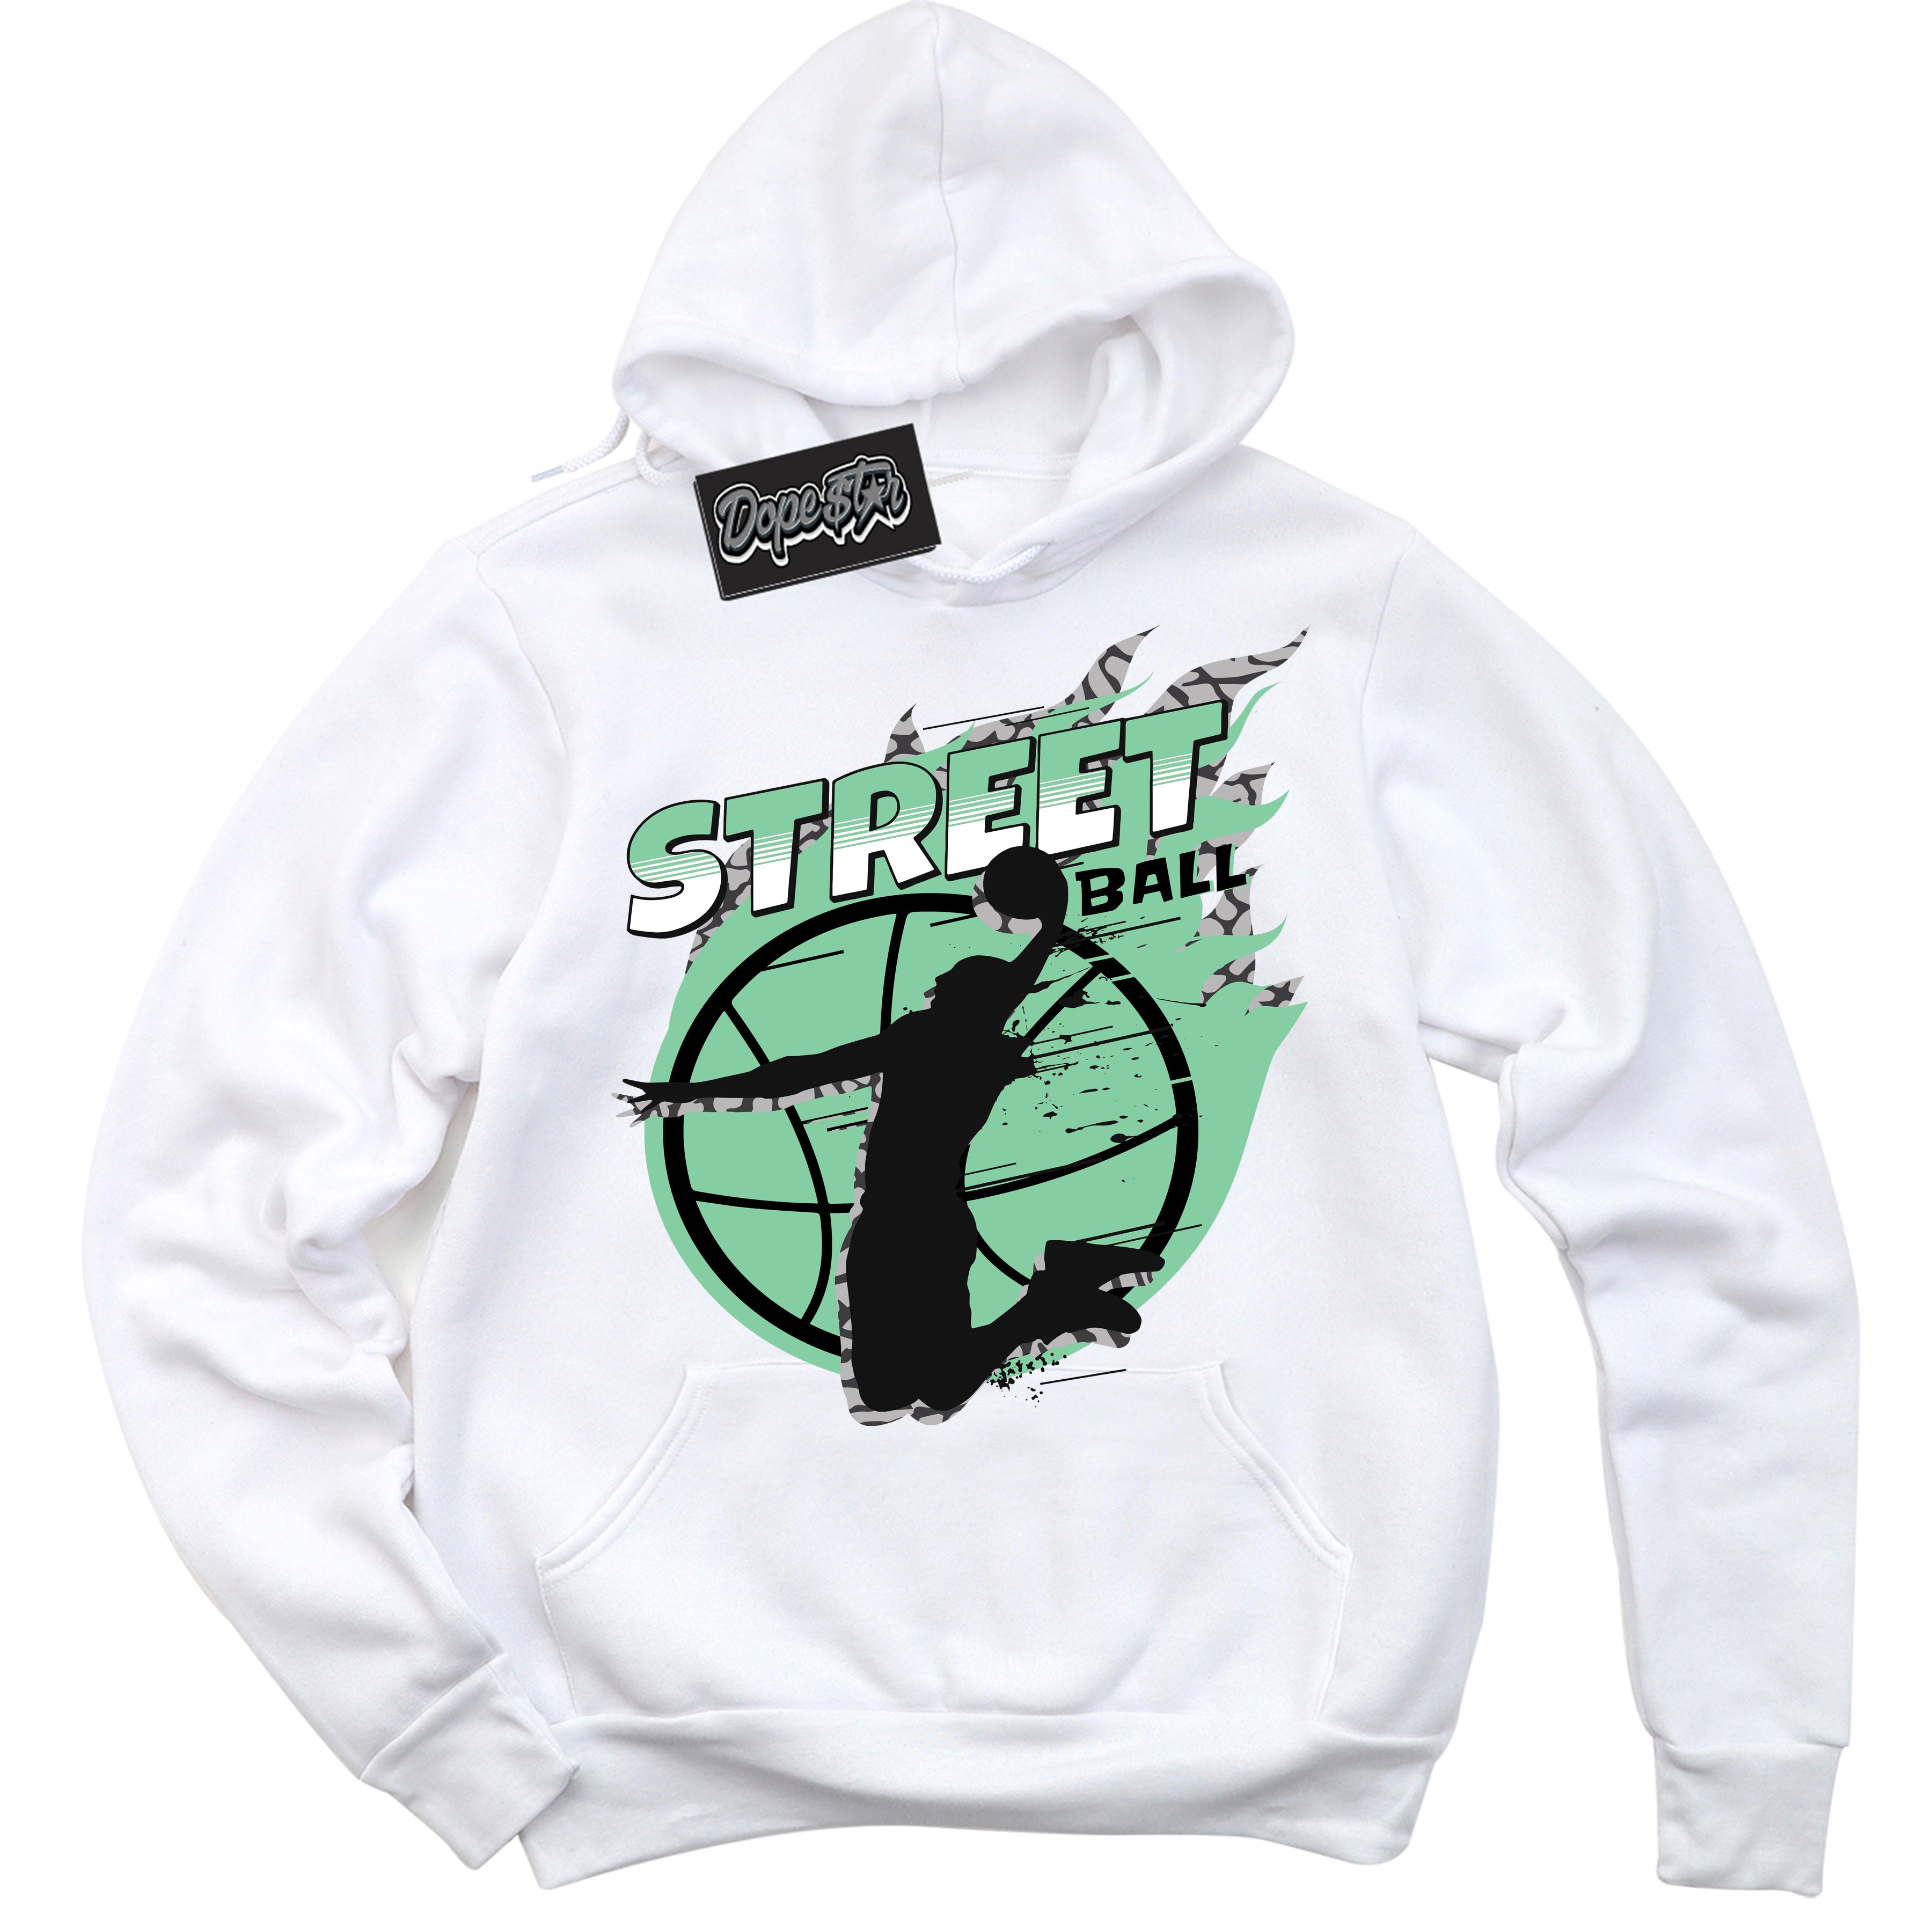 Cool White Graphic DopeStar Hoodie with “ Street Ball “ print, that perfectly matches Green Glow 3s sneakers